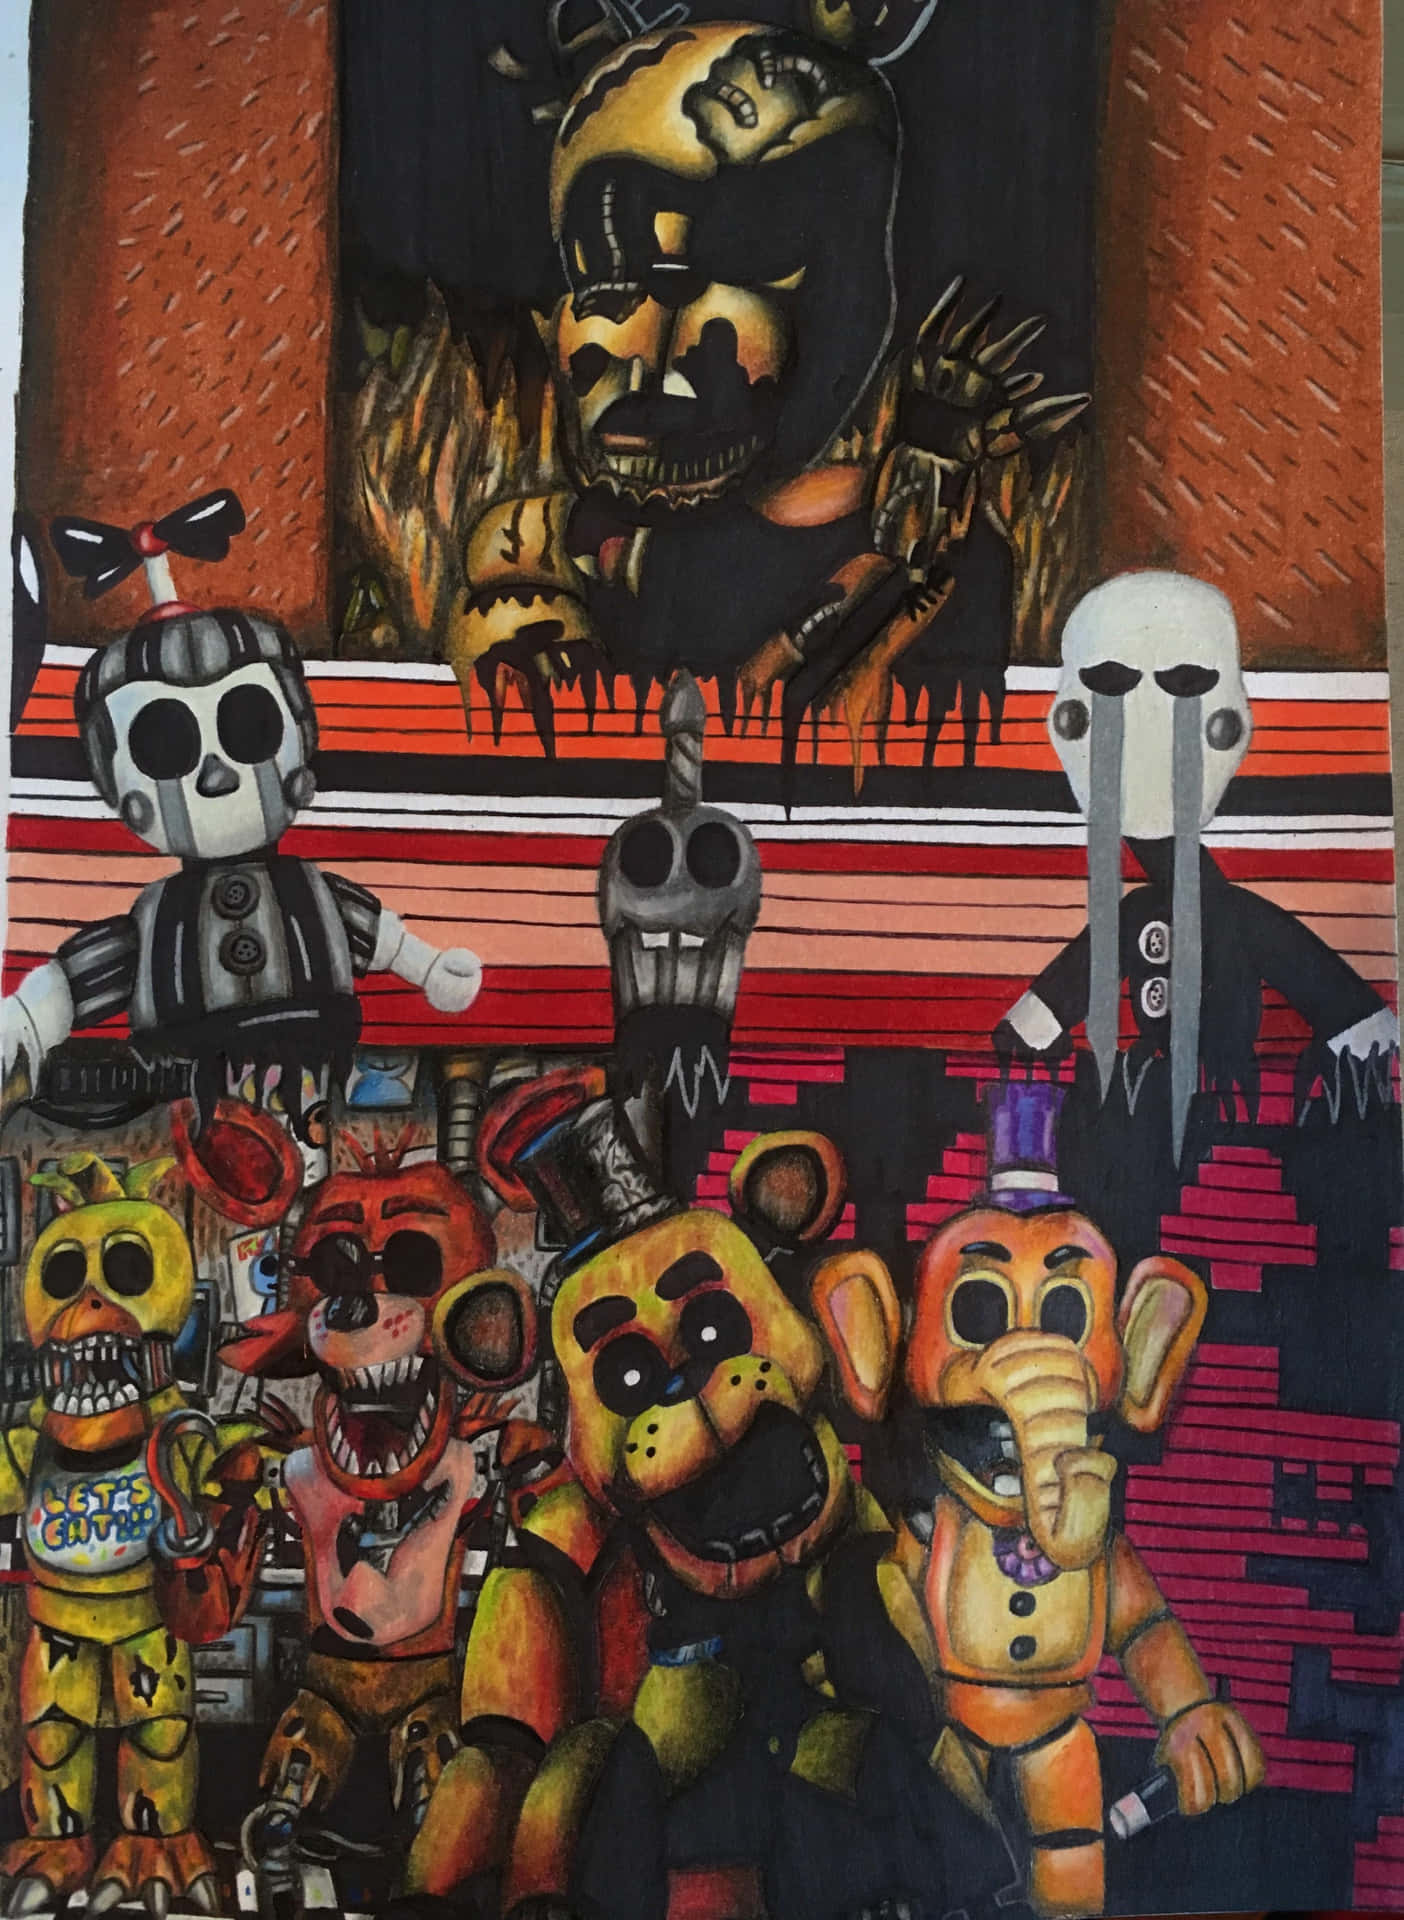 five nights at freddys ultimate custom night  Poster for Sale by